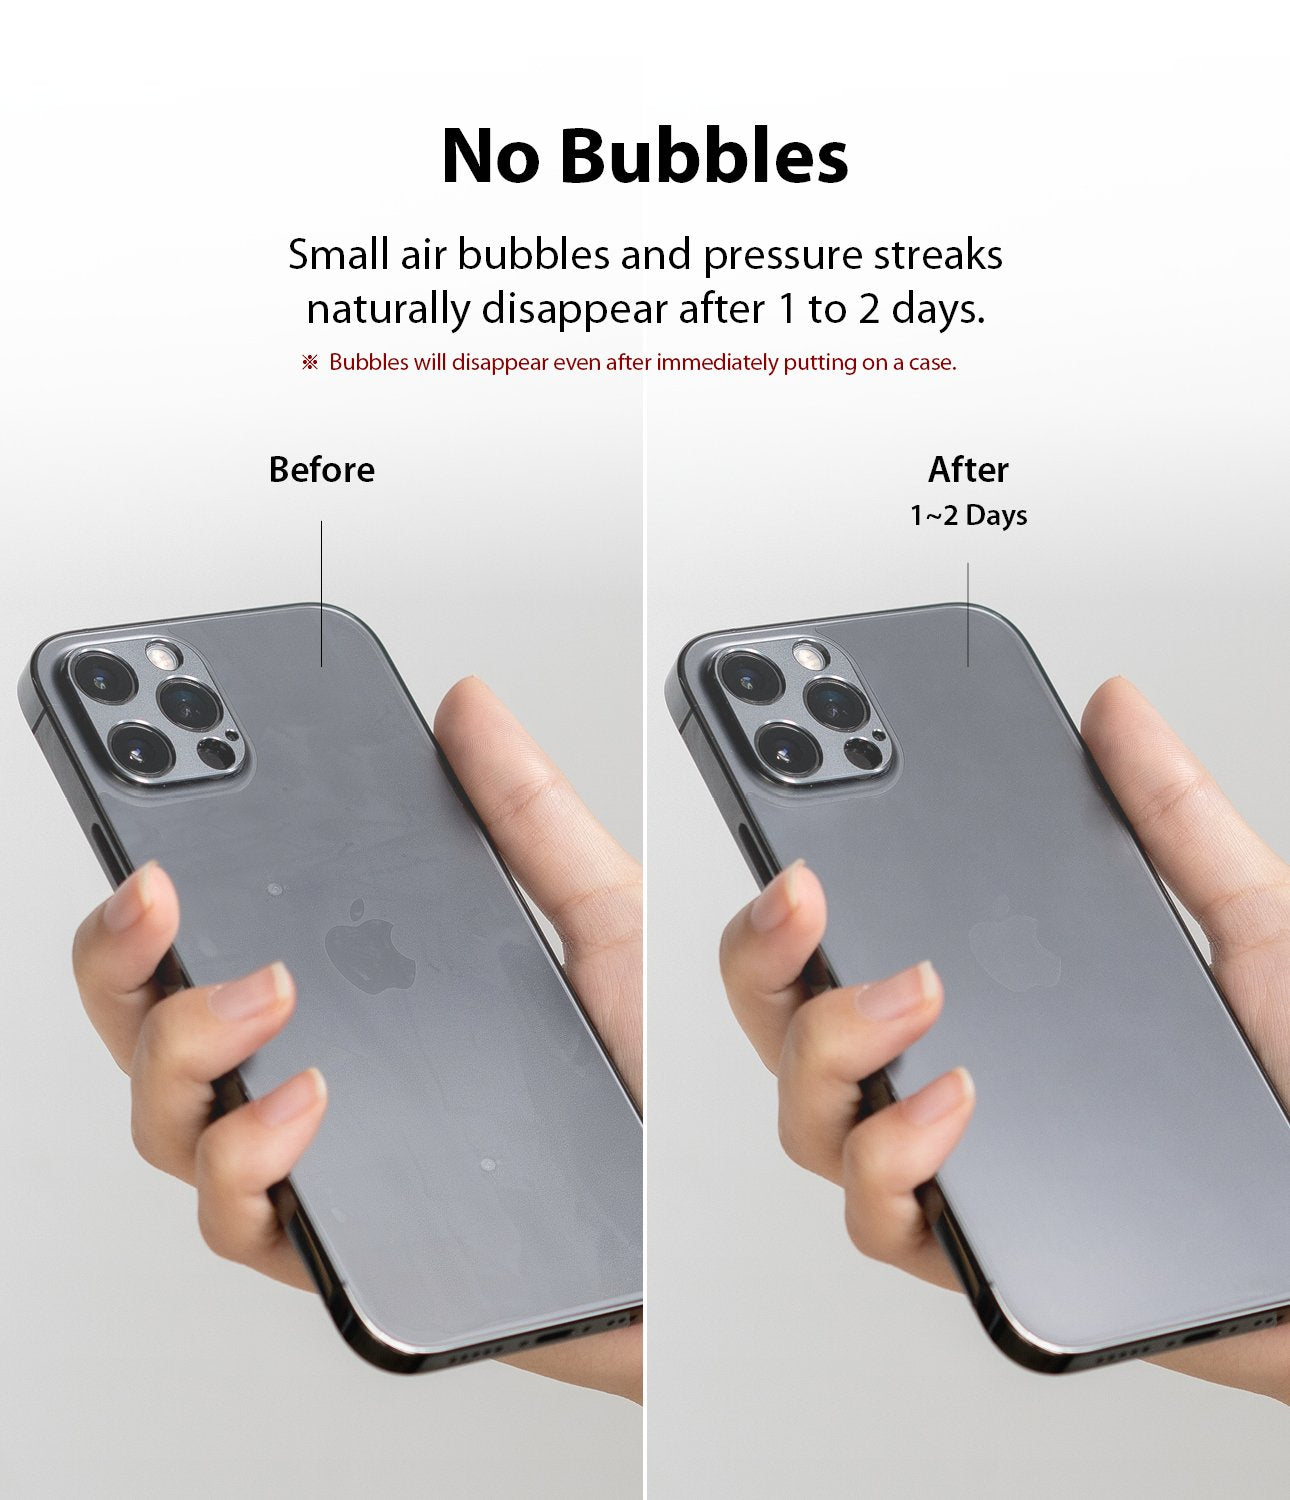 iPhone 13 Pro Max Back Screen Protector | Invisible Defender - No Bubbles. Small air bubbles and pressure streaks naturally disappear after 1 to 2 days. Bubbles will disappear even after immediately putting on a case.